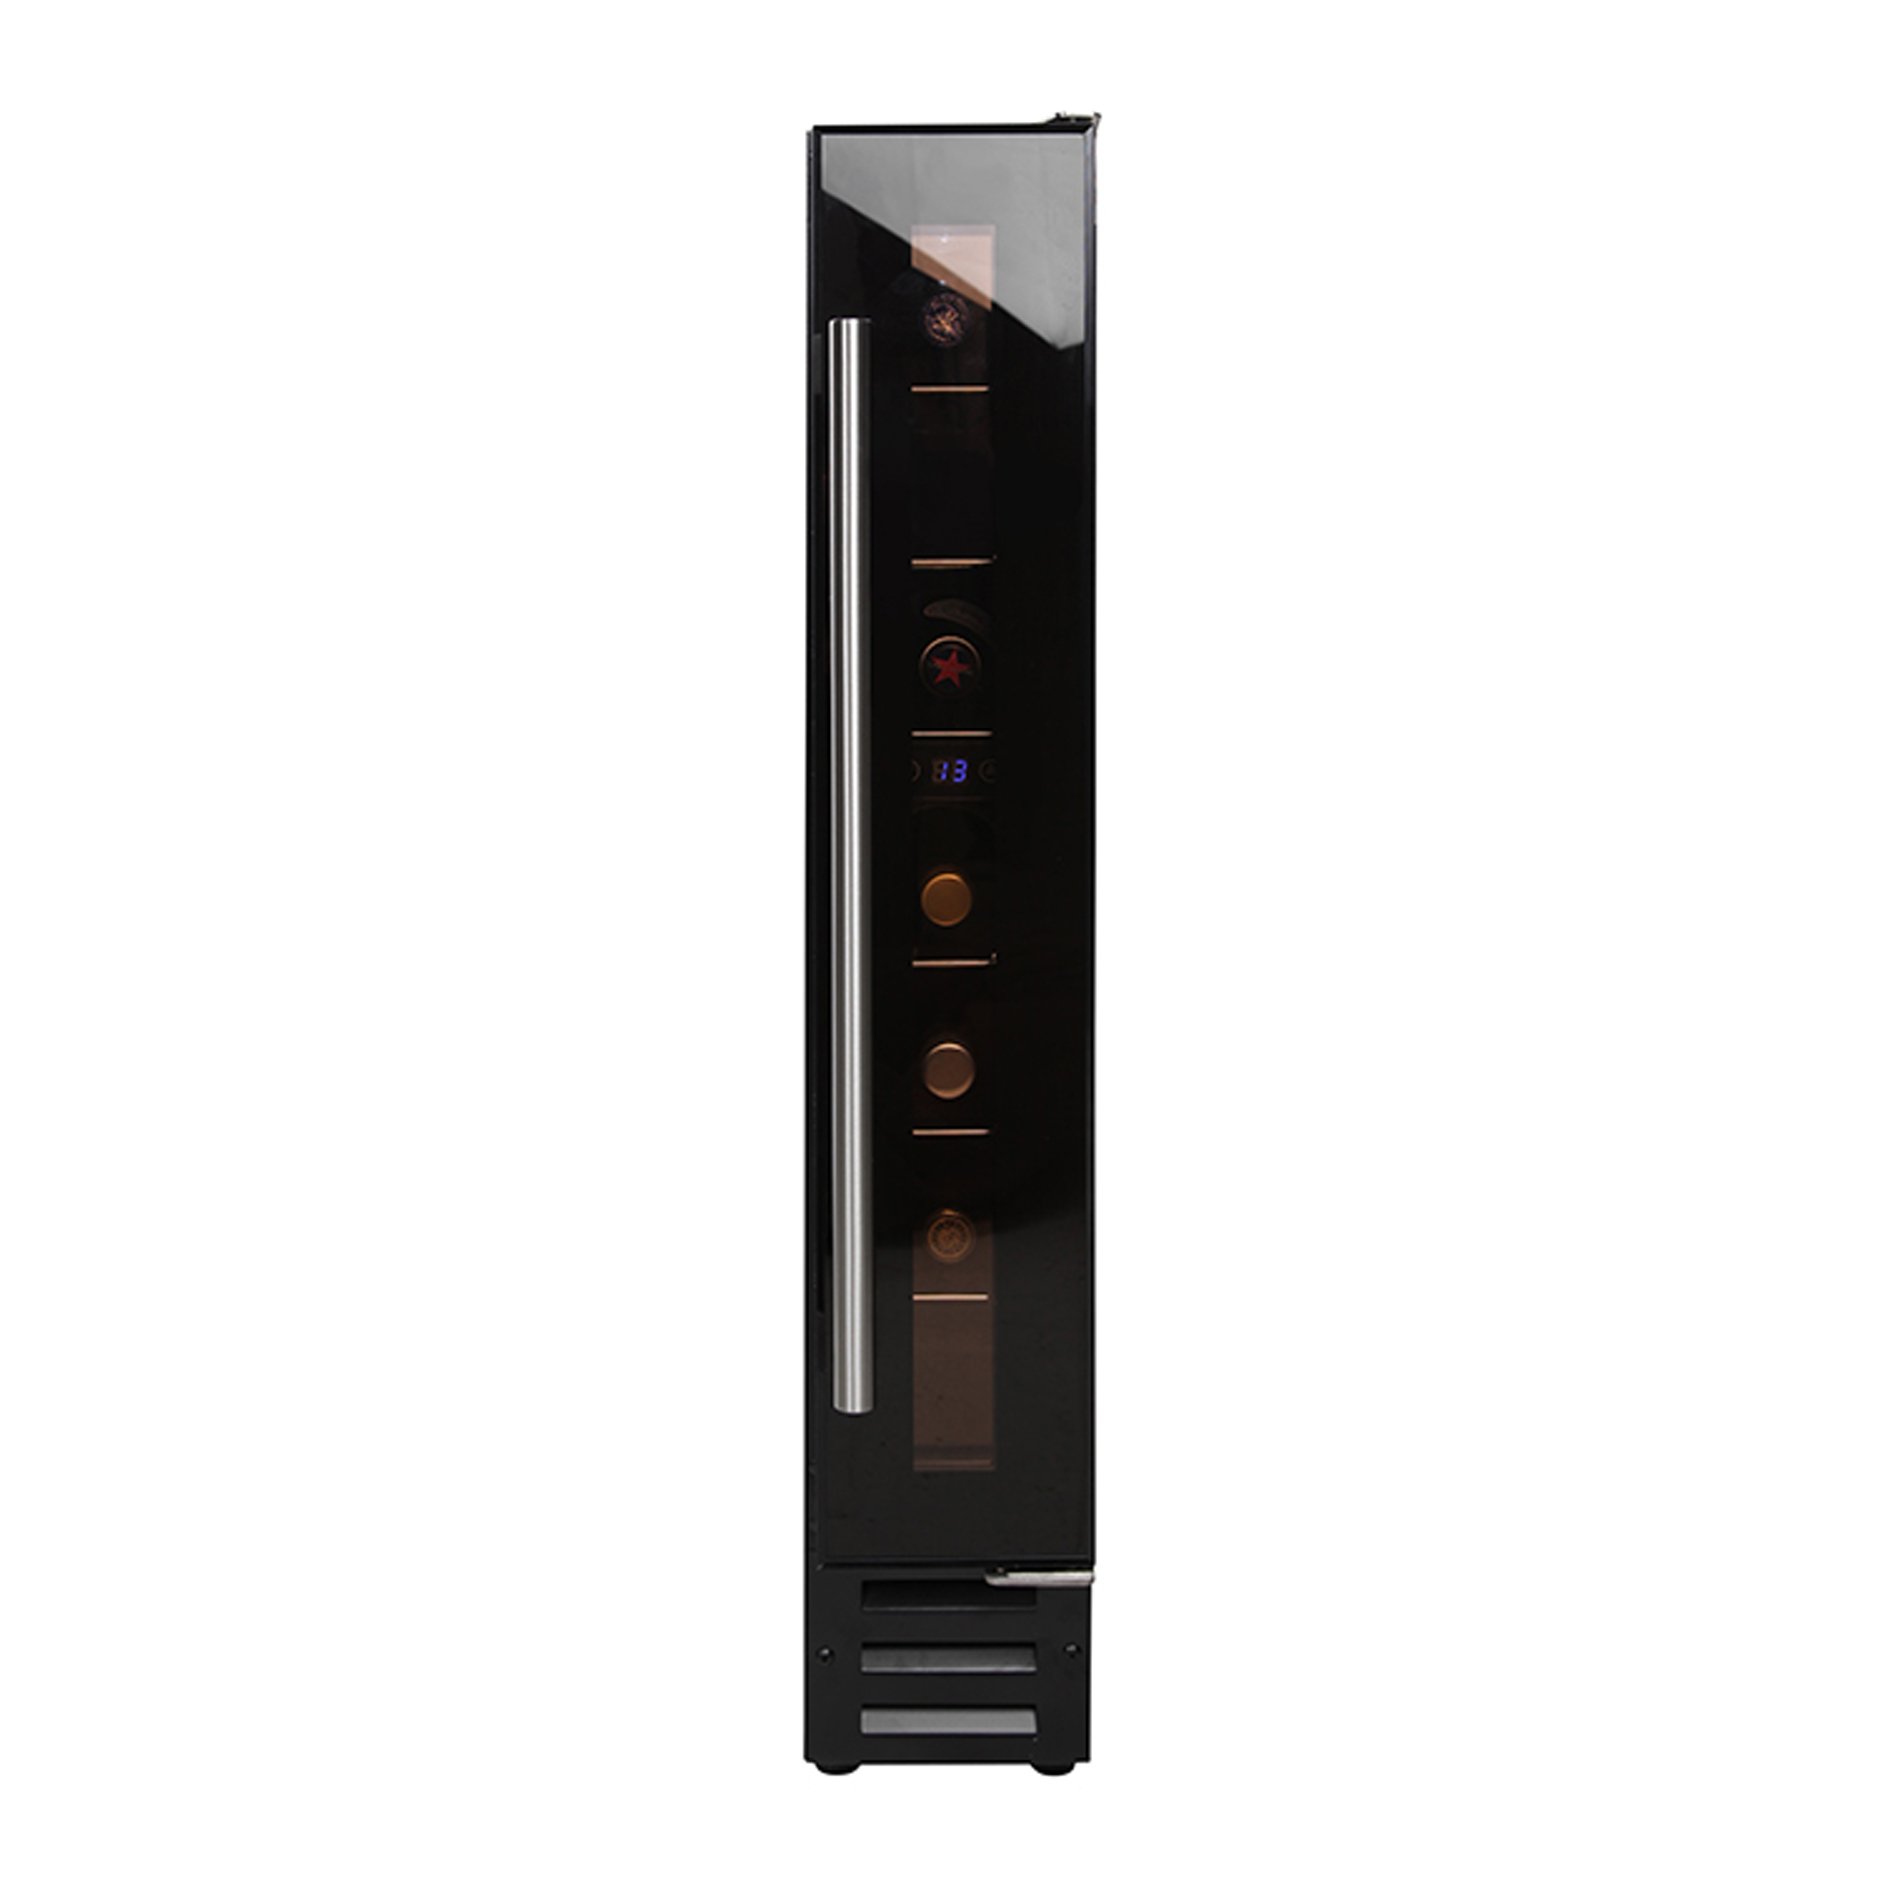 150mm integrated wine cooler offers ample space for 7 bottles of wine. Additional features include easy to use controls, 6 chrome wire shelves and adjustable thermostat.